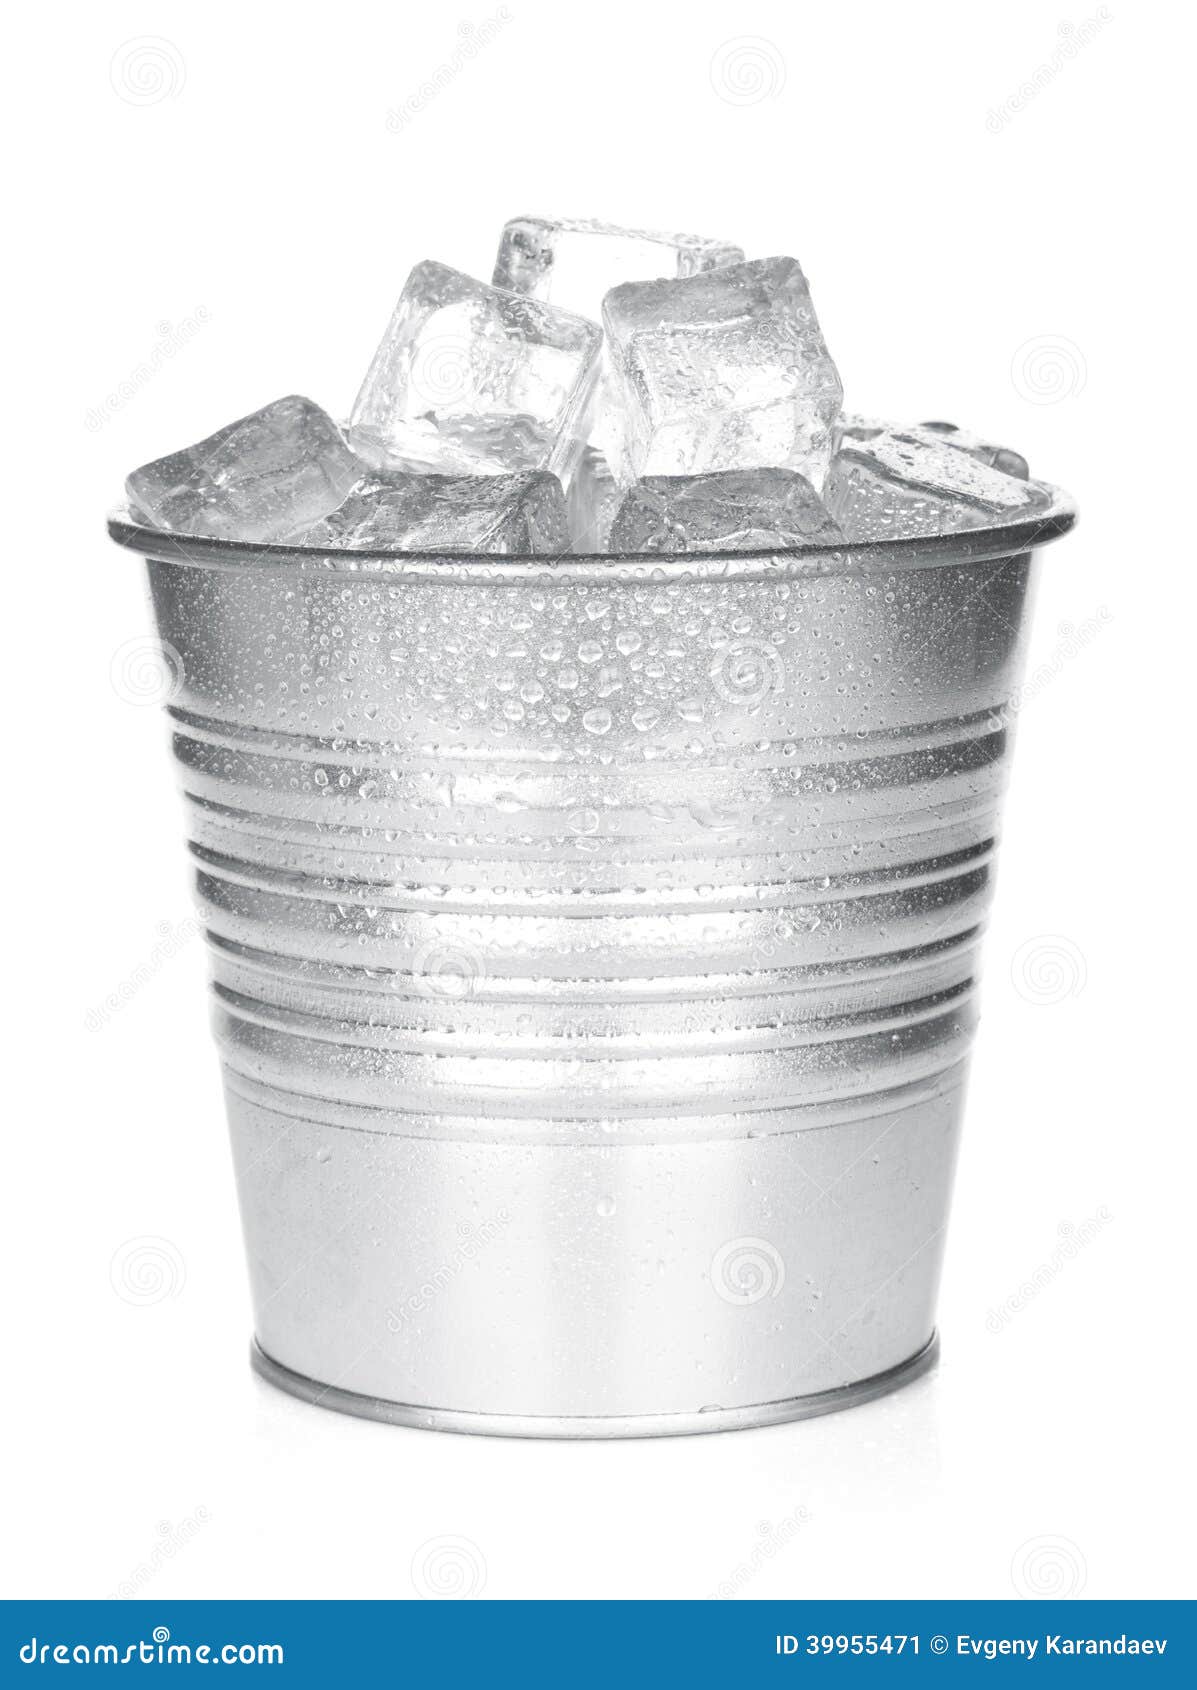 https://thumbs.dreamstime.com/z/bucket-ice-cubes-isolated-white-background-39955471.jpg